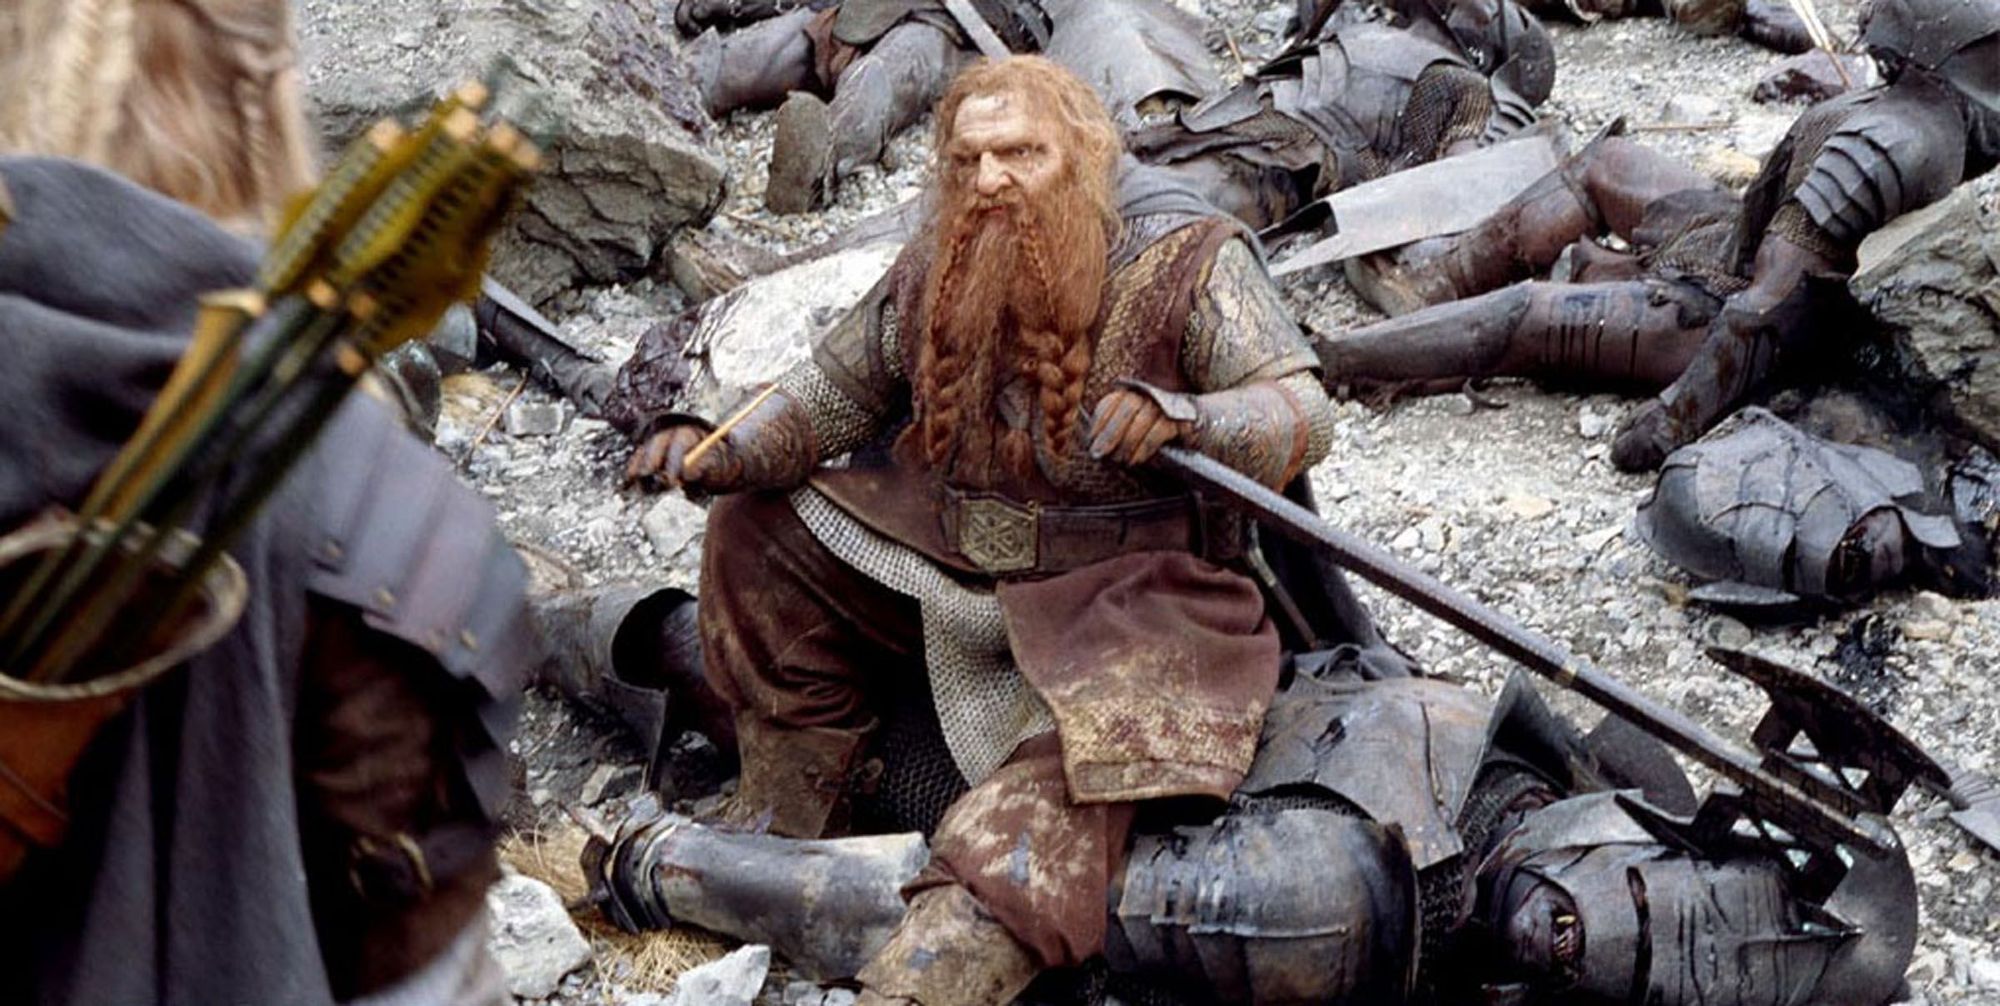 Gimli at with his axe